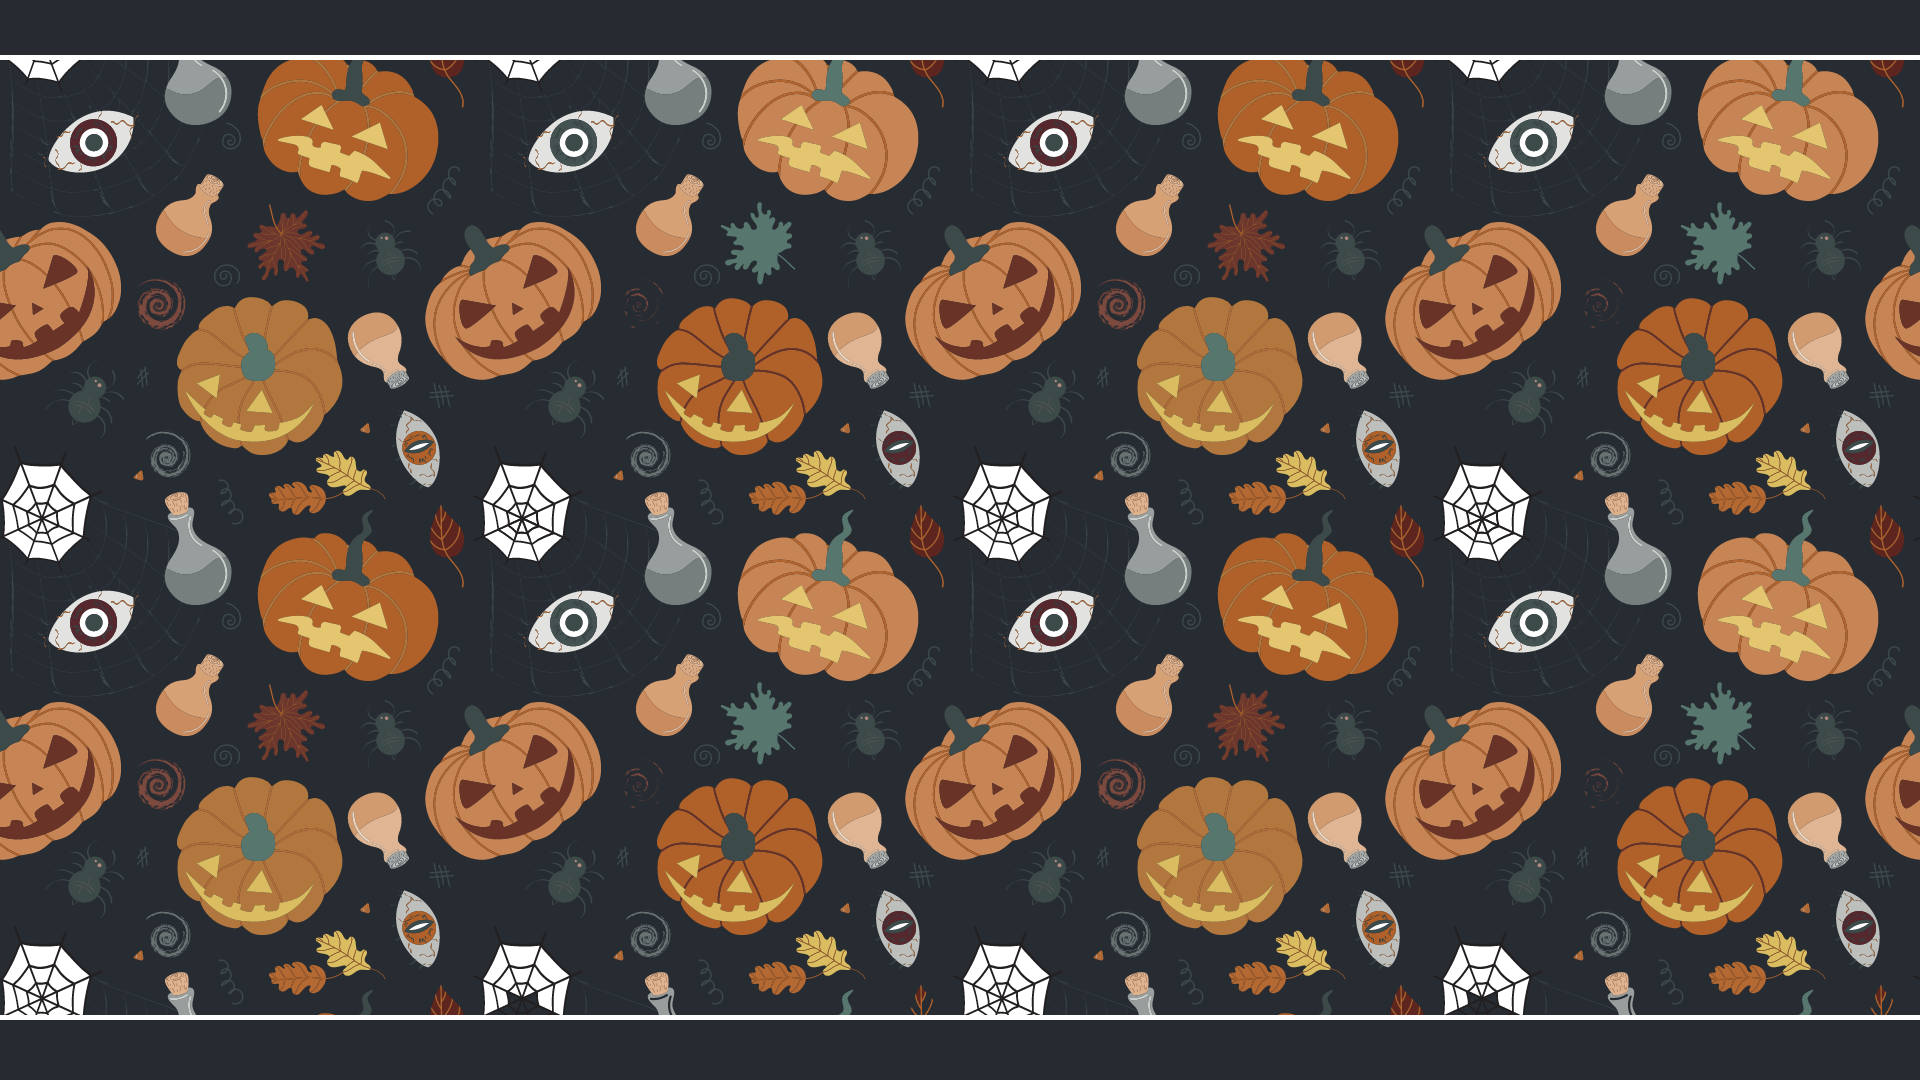 Wear your scary aesthetic with pride and make your laptop the inspiration for a spooky Halloween. Wallpaper